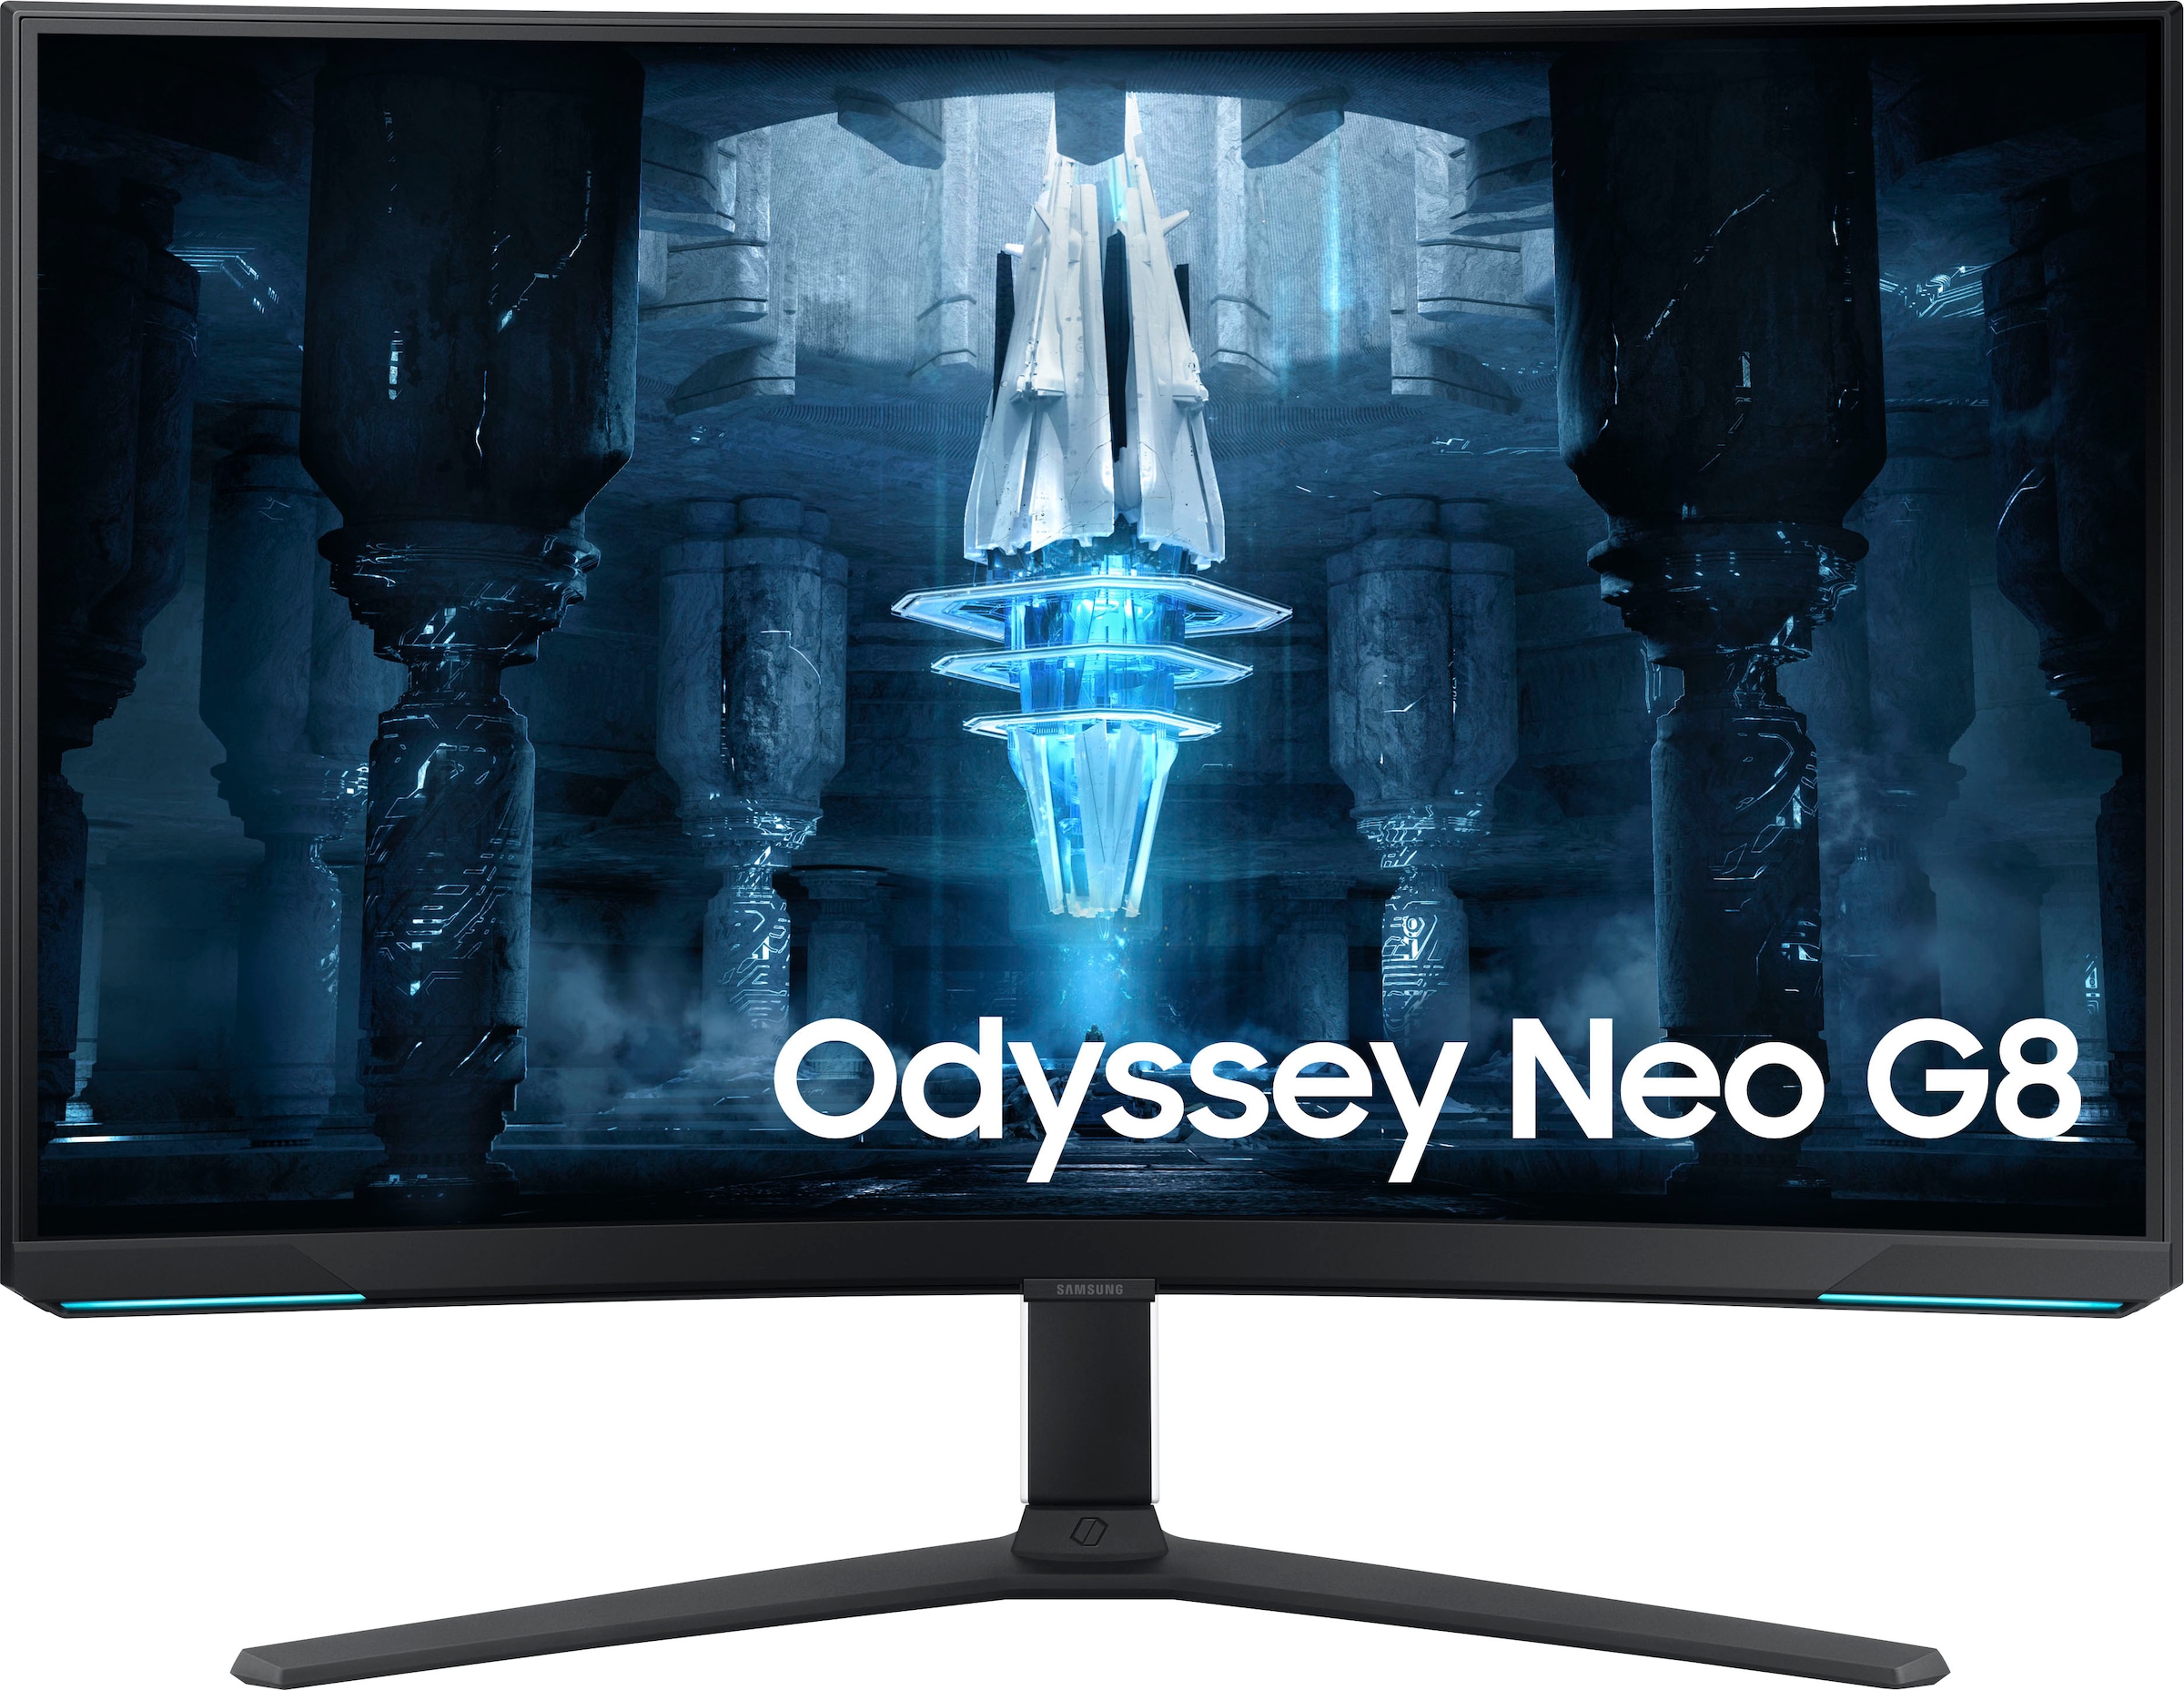 Samsung Curved-Gaming-LED-Monitor ms px, Reaktionszeit, 81 4K OTTO cm/32 Neo 1 bei 3840 (G/G) x Hz, Ultra 1ms S32BG850NP«, 165 Zoll, 2160 G8 »Odyssey HD